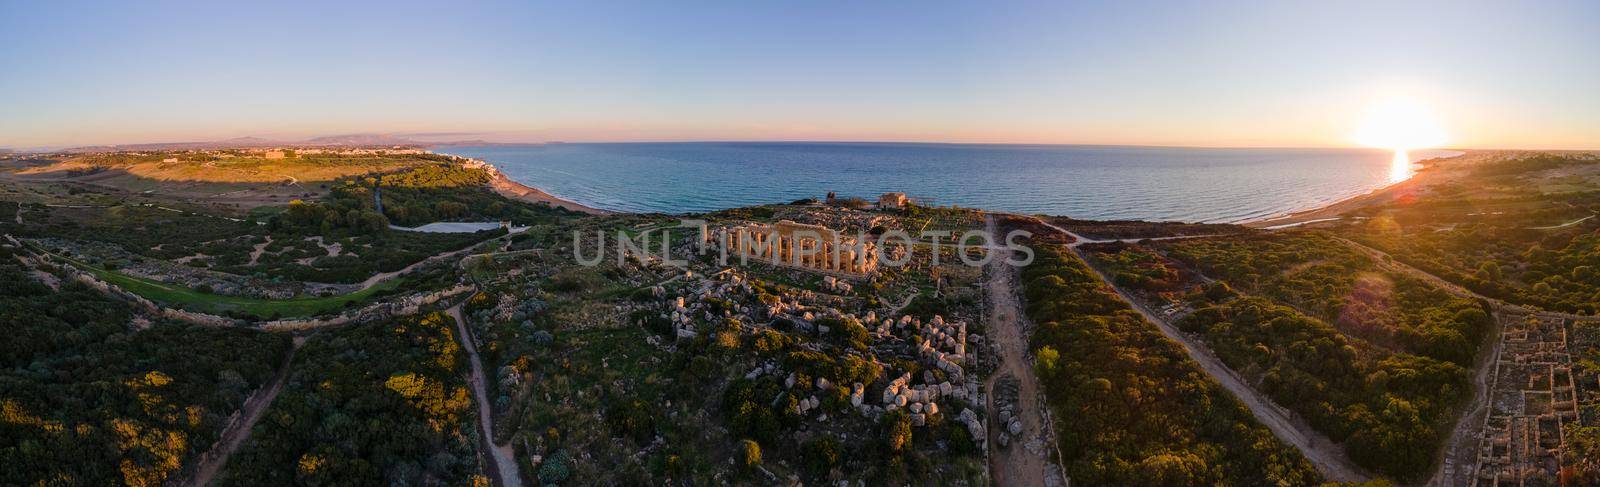 Greek temples at Selinunte, View on sea and ruins of greek columns in Selinunte Archaeological Park Sicily Italy